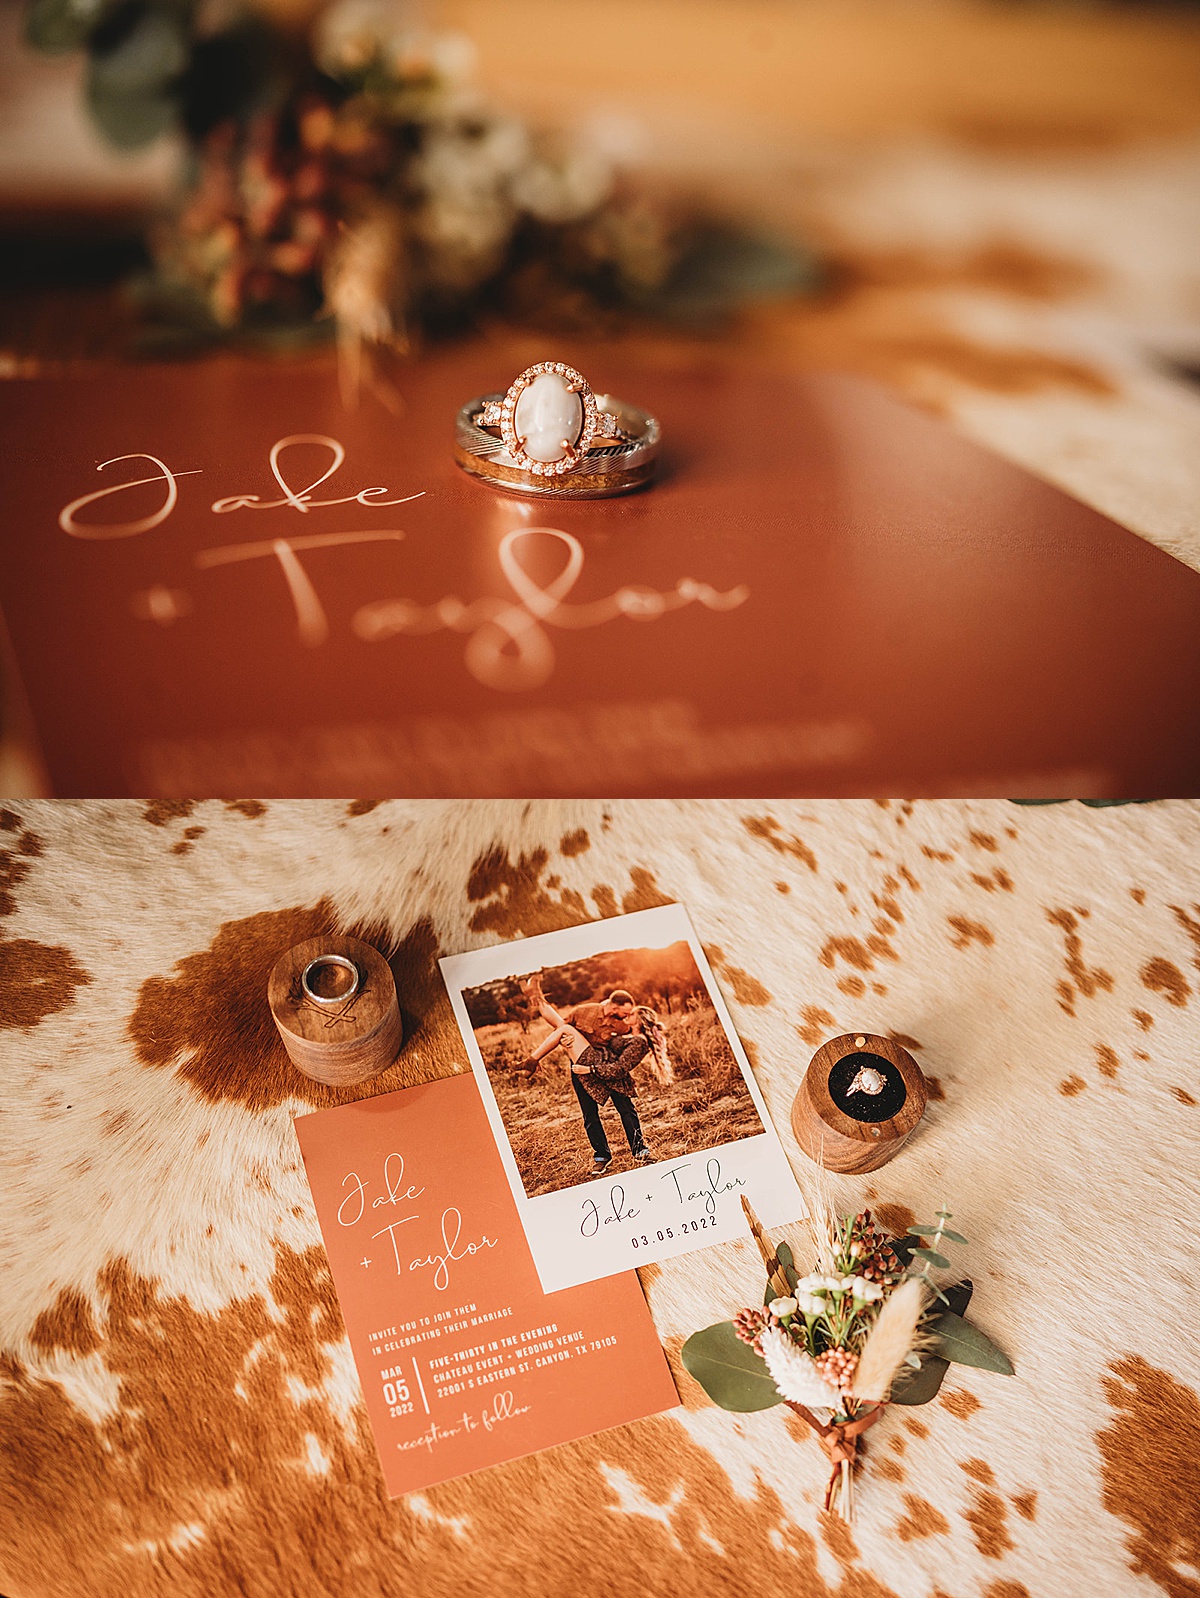 details of bride and groom rings, invitation and save the date cards from boho prairie wedding